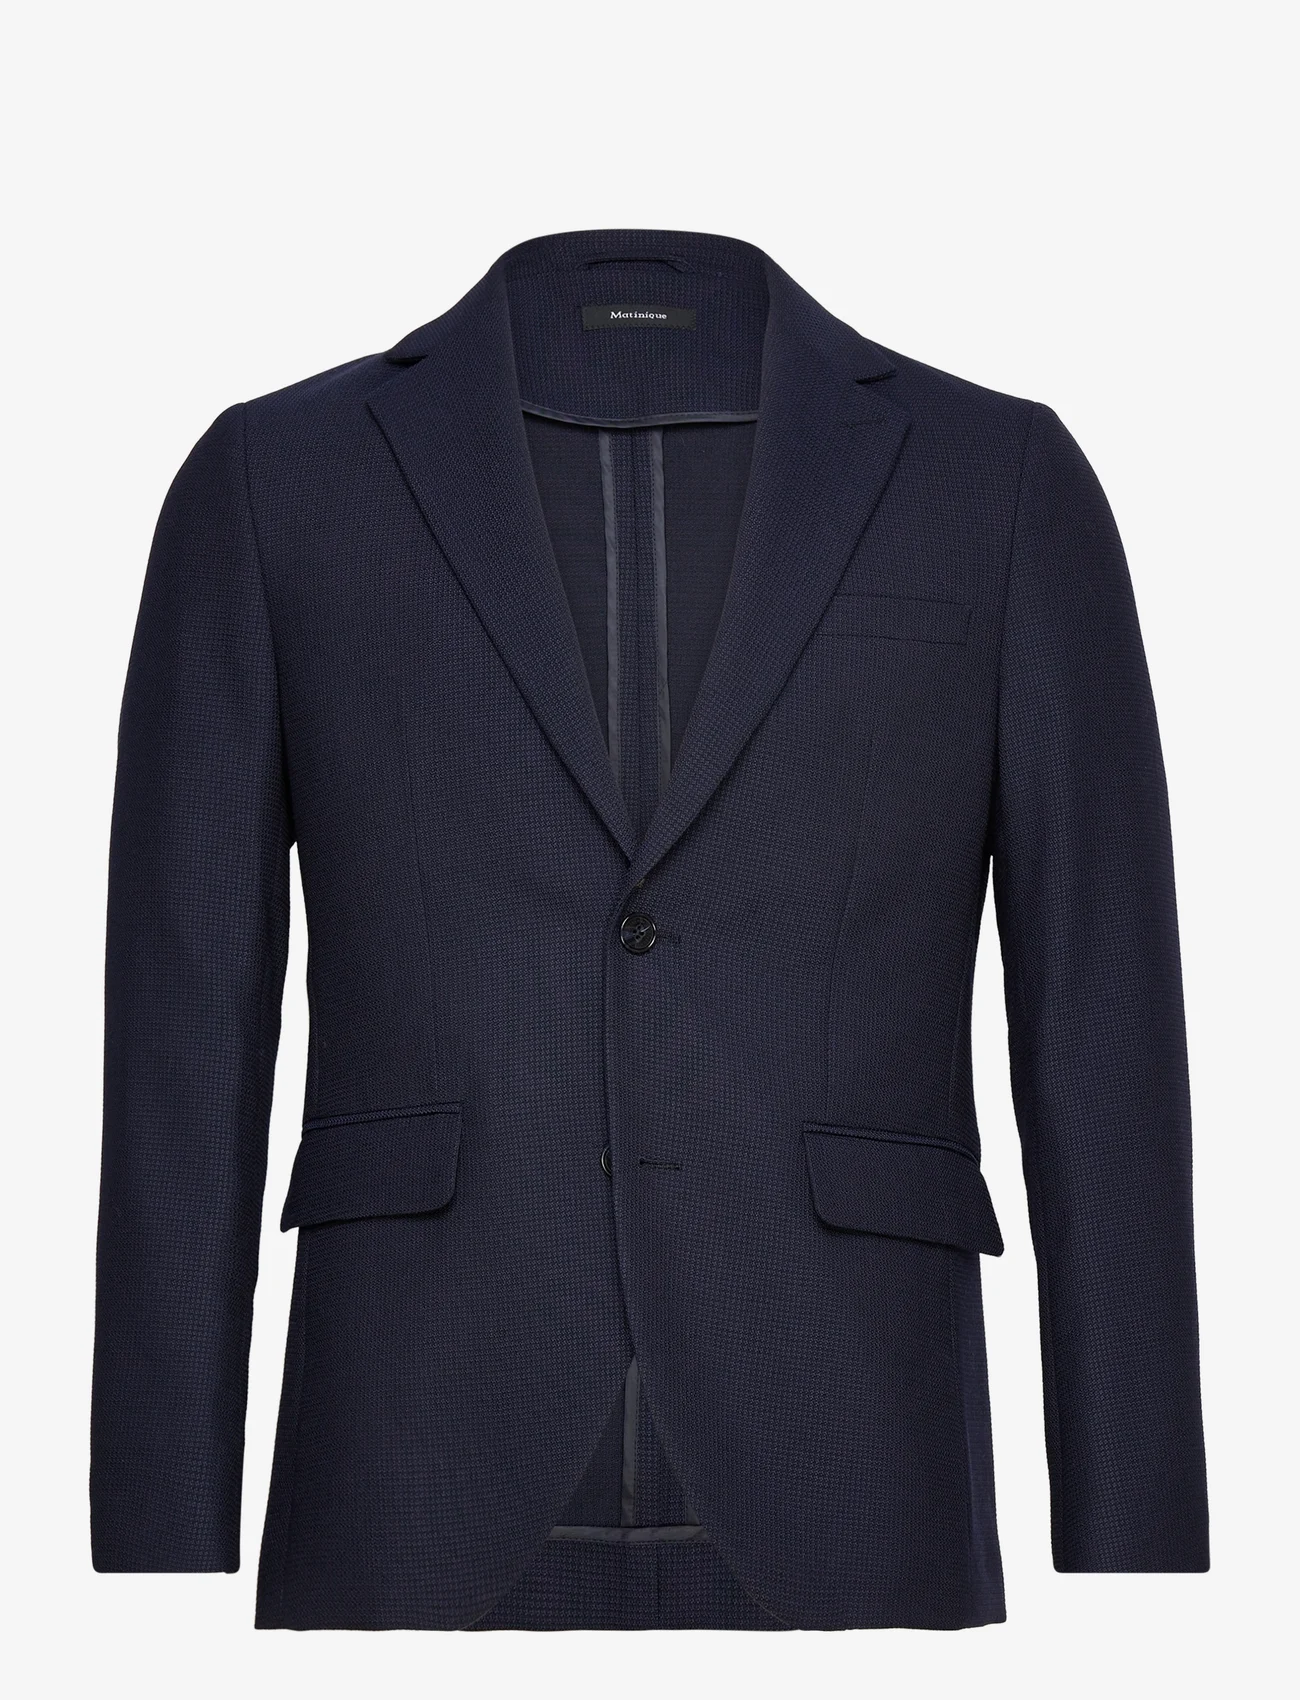 Matinique - MAgeorge - double breasted blazers - dark navy - 0